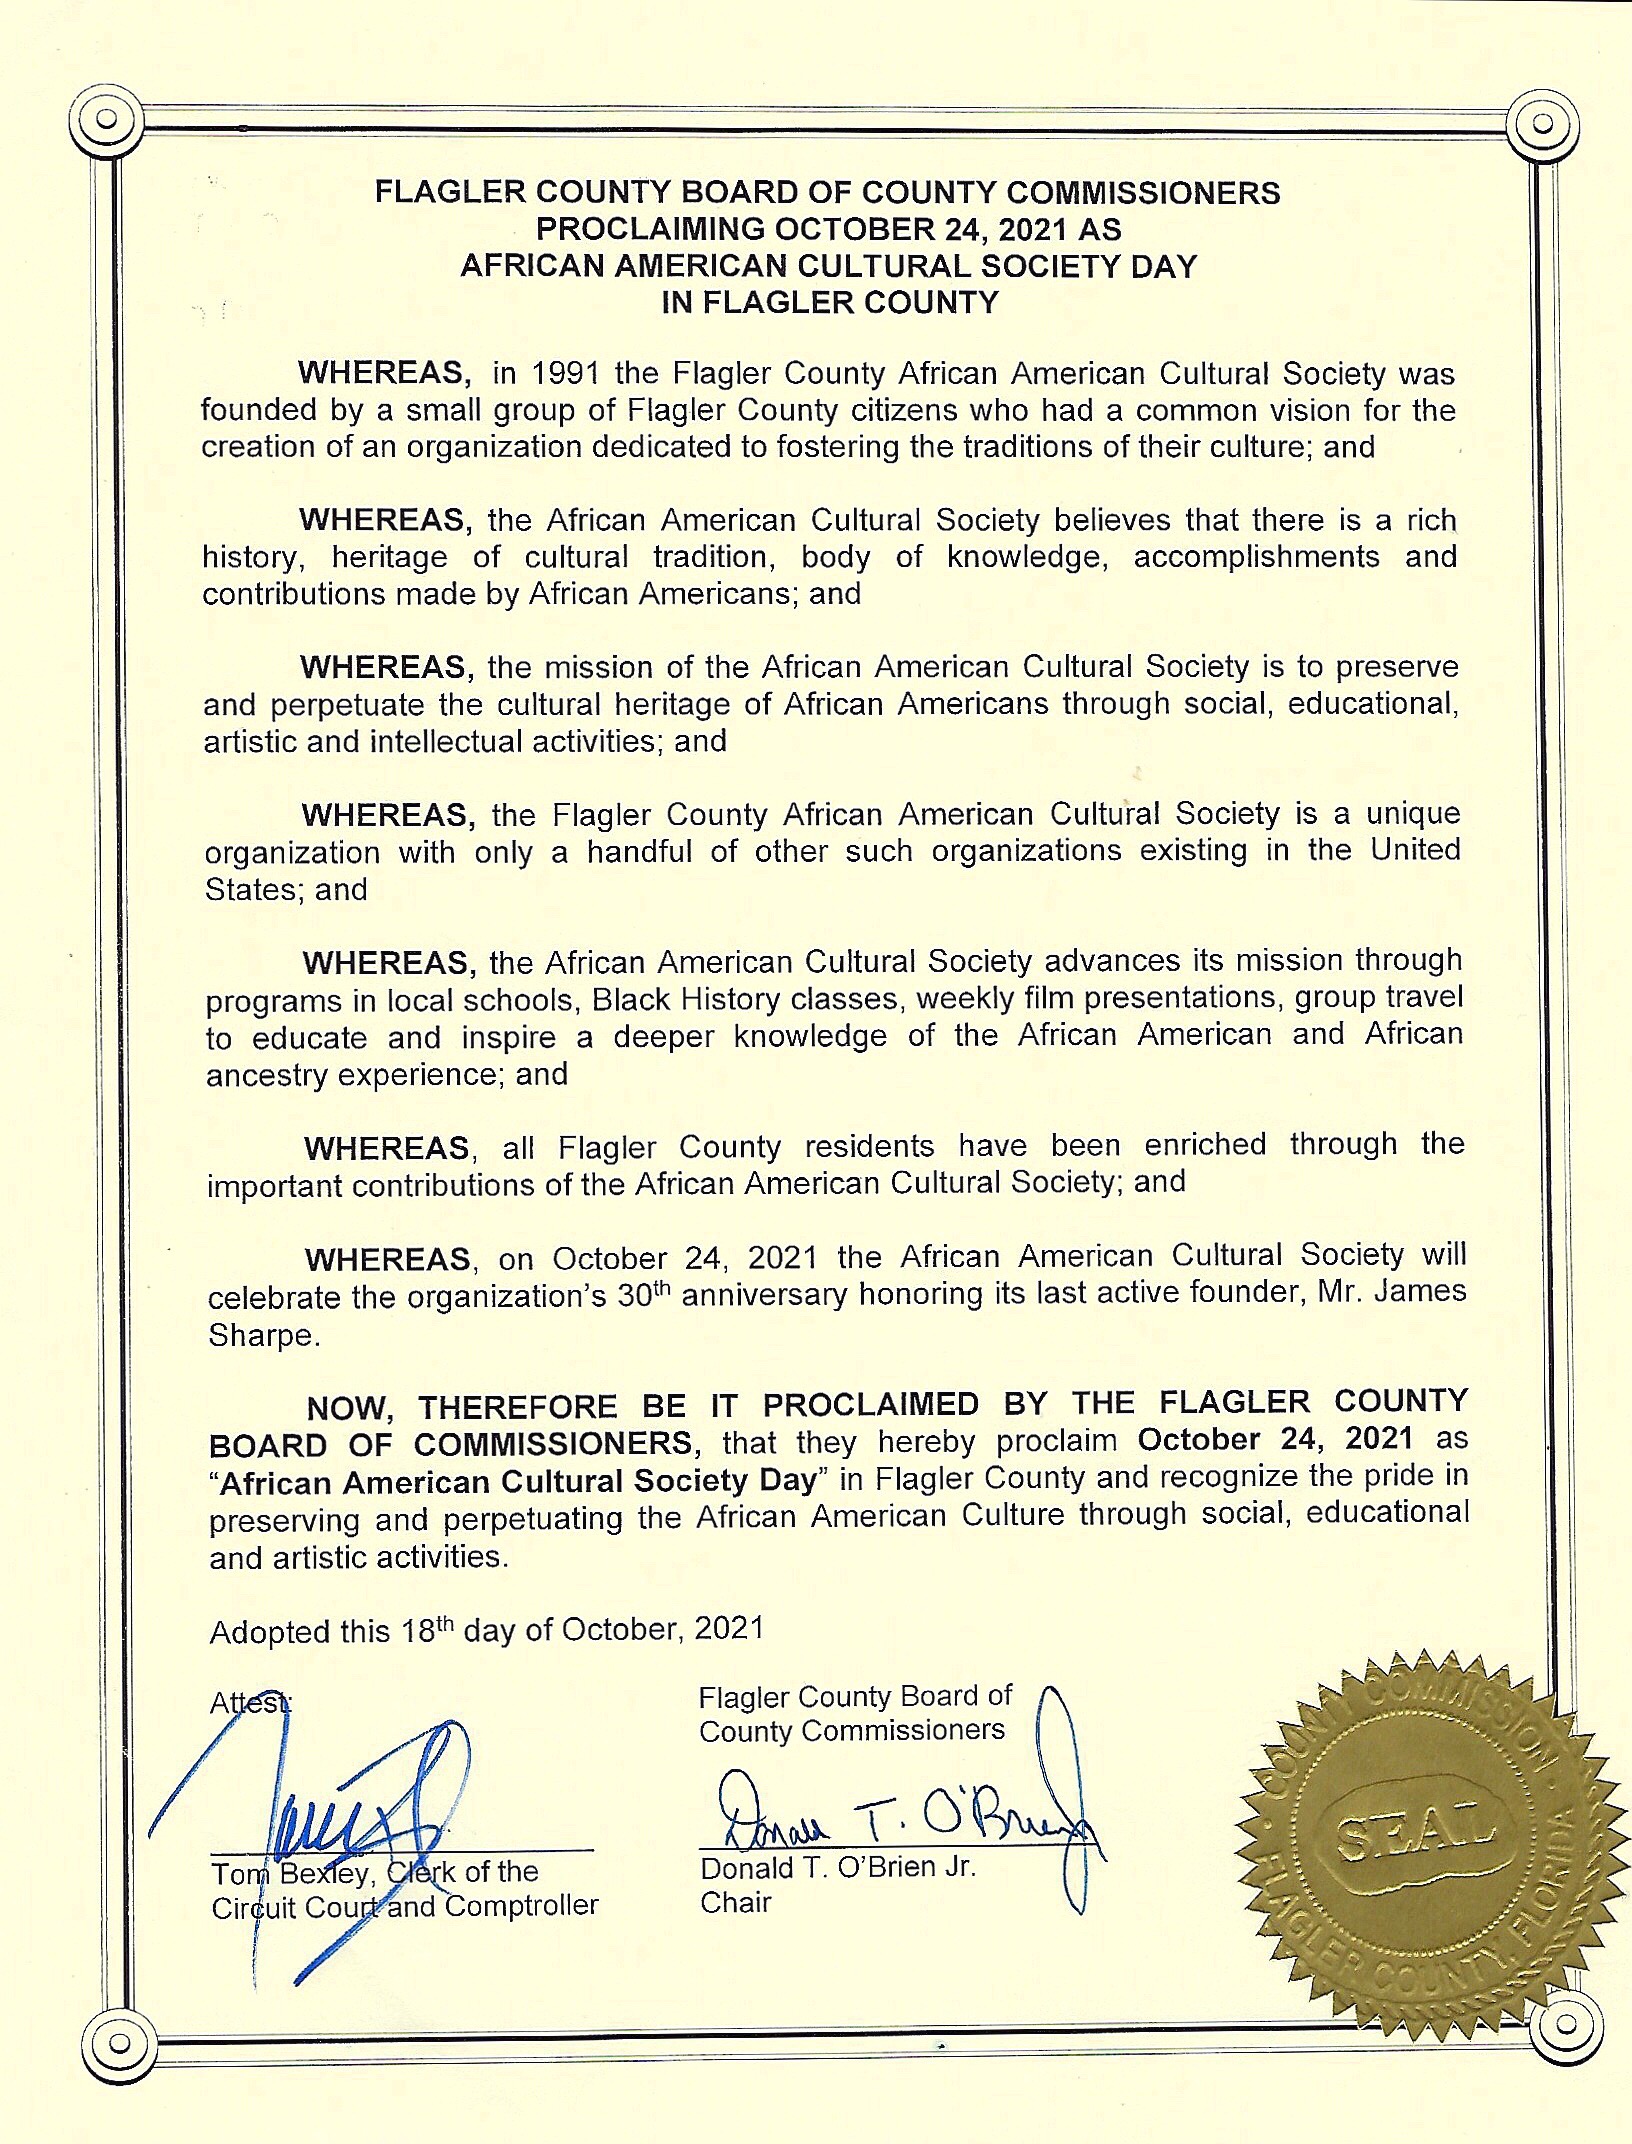 Board of County Commissioners Proclamation